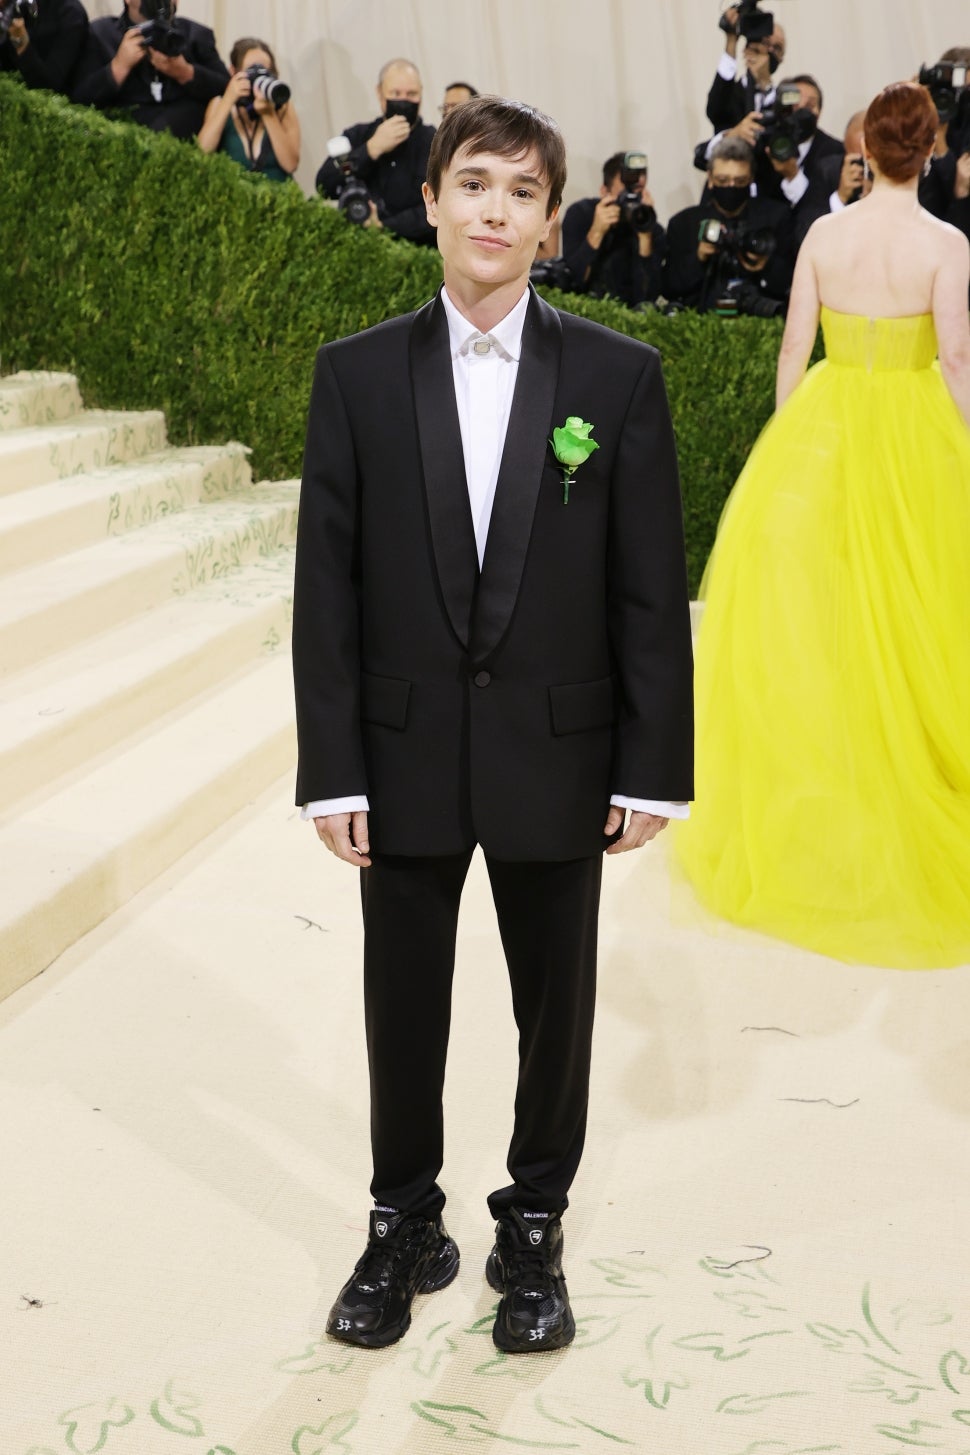 Elliot Page attends The 2021 Met Gala Celebrating In America: A Lexicon Of Fashion at Metropolitan Museum of Art on September 13, 2021 in New York City. 